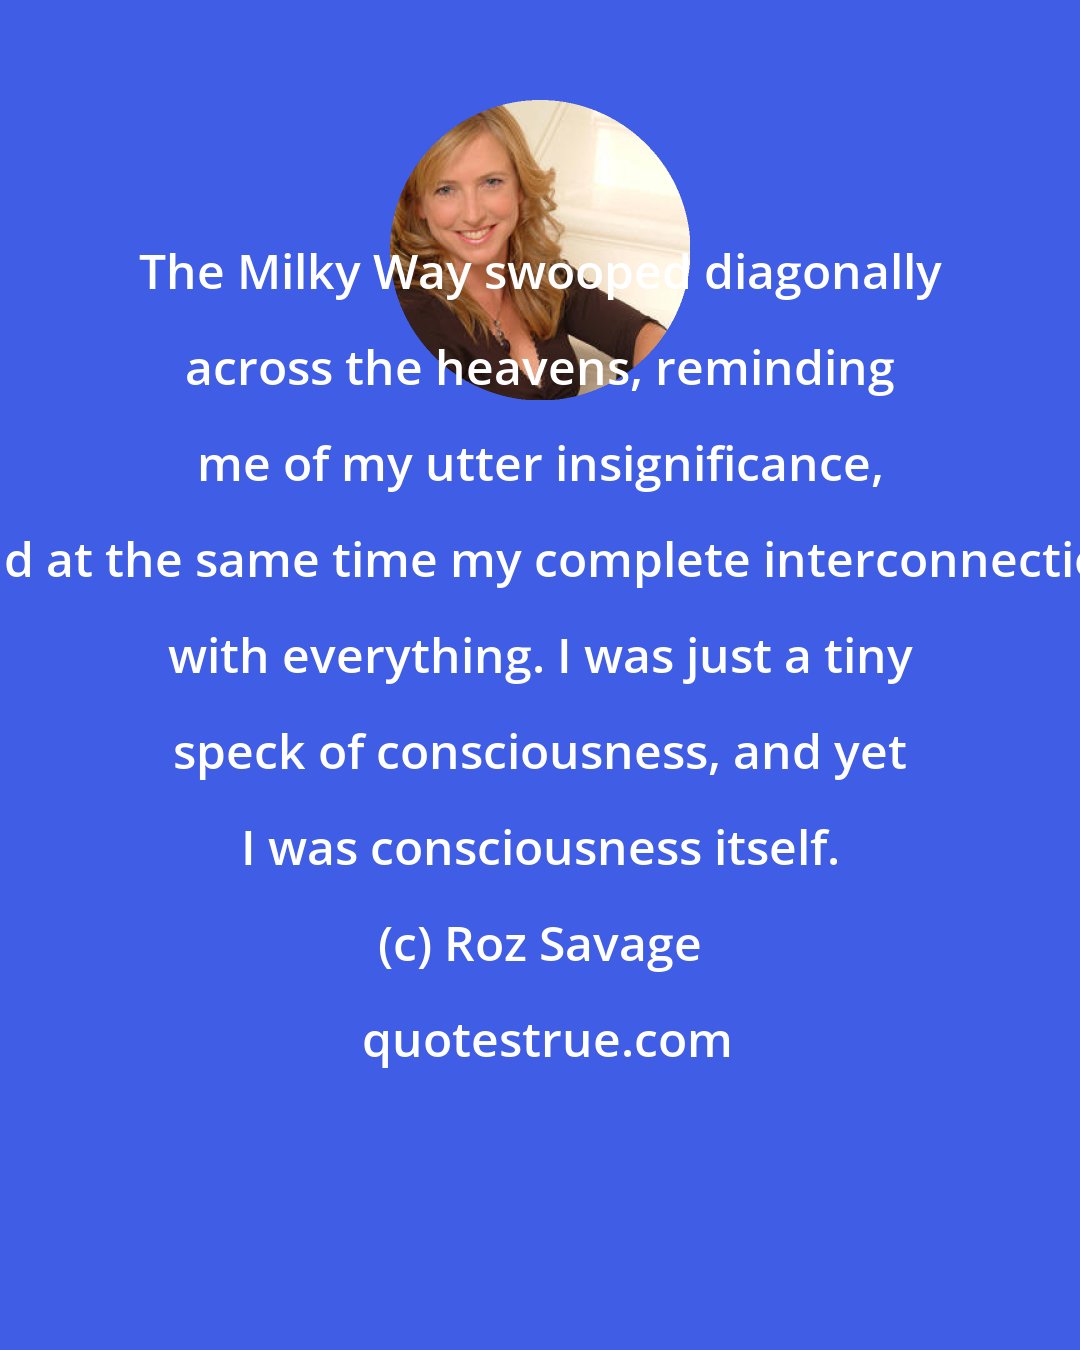 Roz Savage: The Milky Way swooped diagonally across the heavens, reminding me of my utter insignificance, and at the same time my complete interconnection with everything. I was just a tiny speck of consciousness, and yet I was consciousness itself.